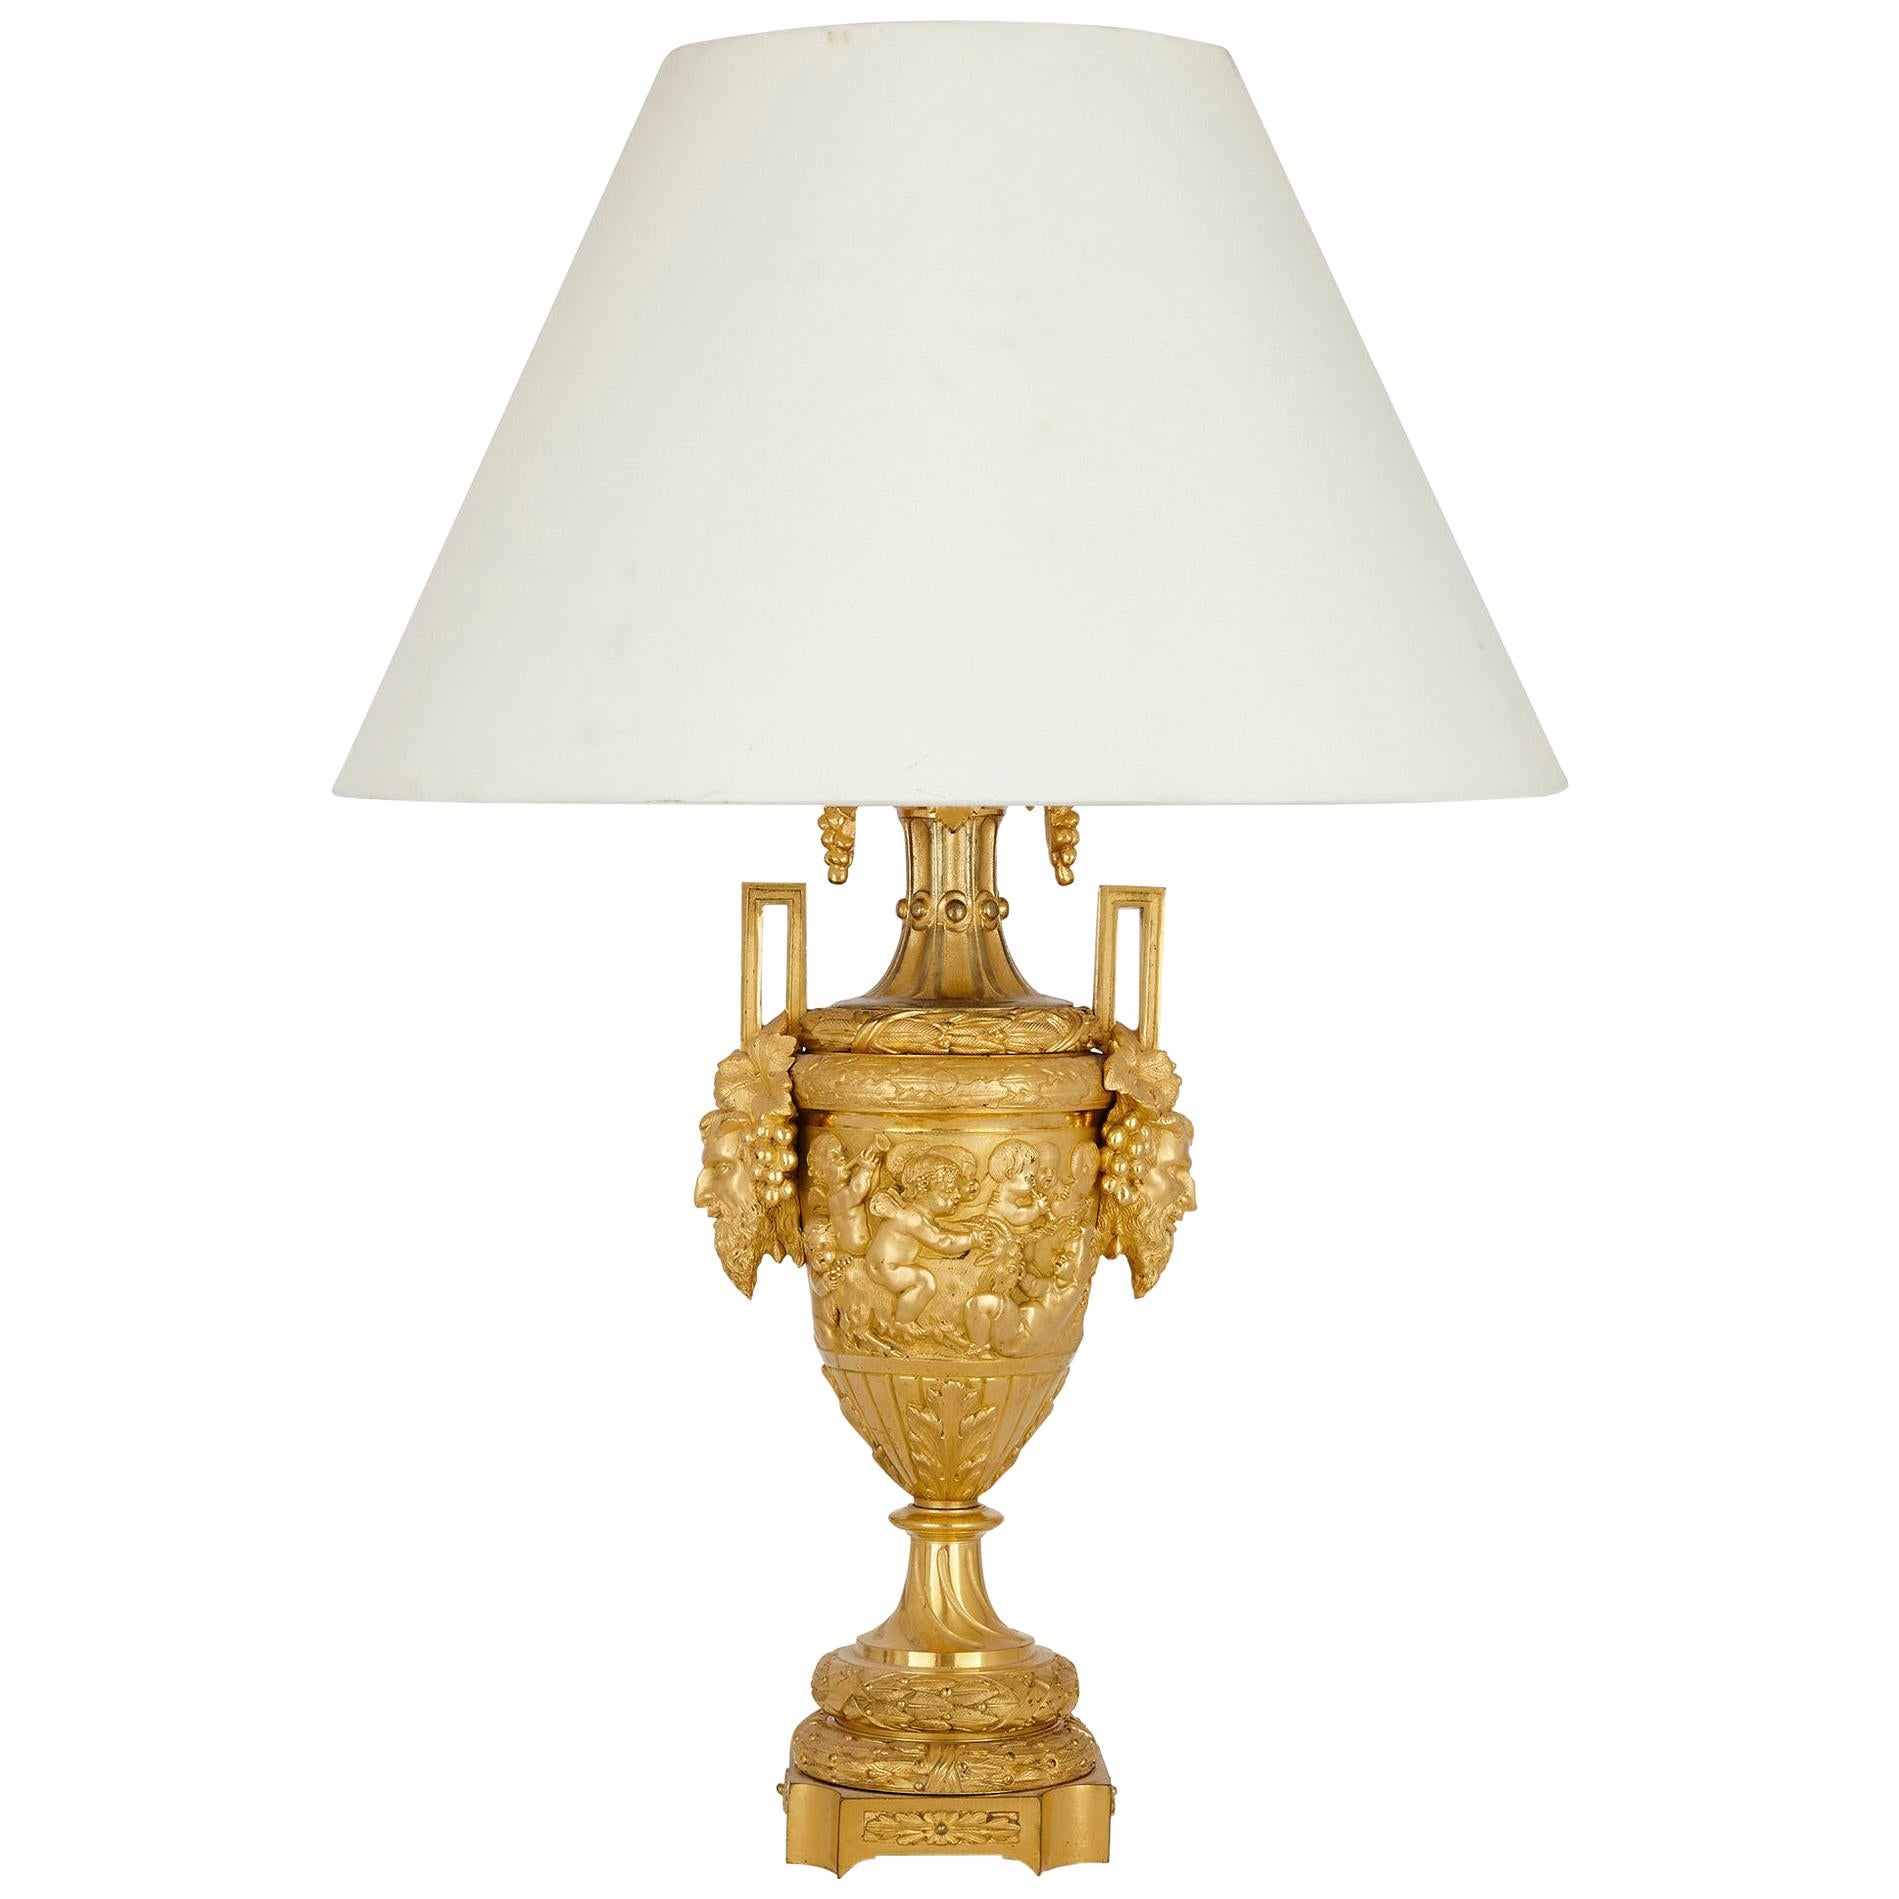 Gilt Bronze Table Lamp In The Rococo, Old World Style Table Lamps